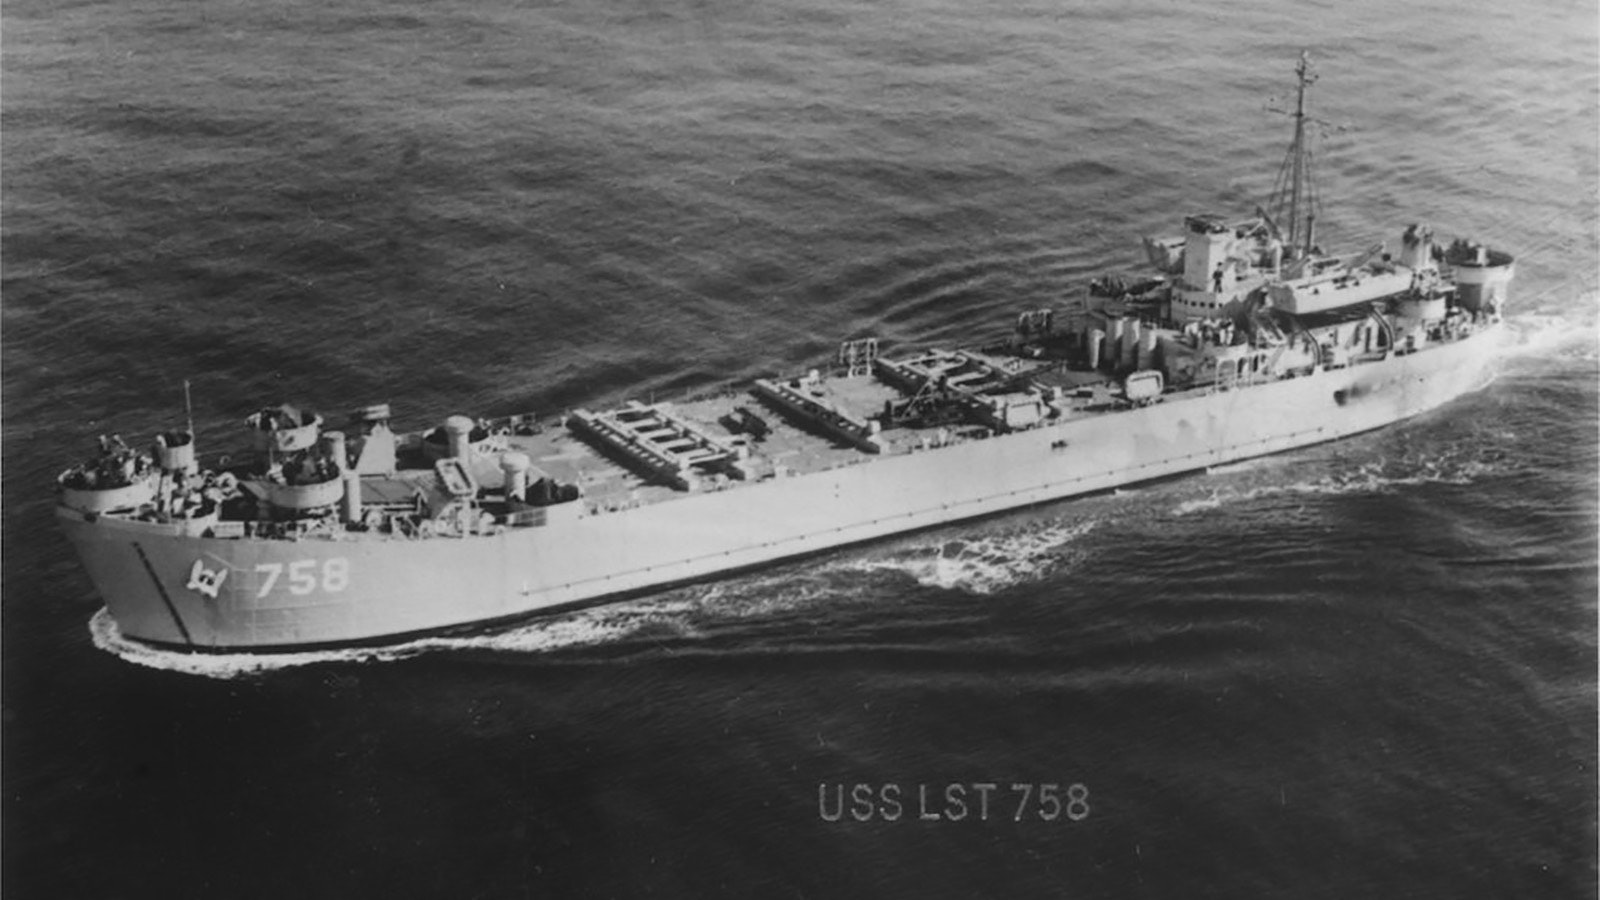 The USS LST-758 was recommissioned for assignment in the Korean War, shown here in 1950.